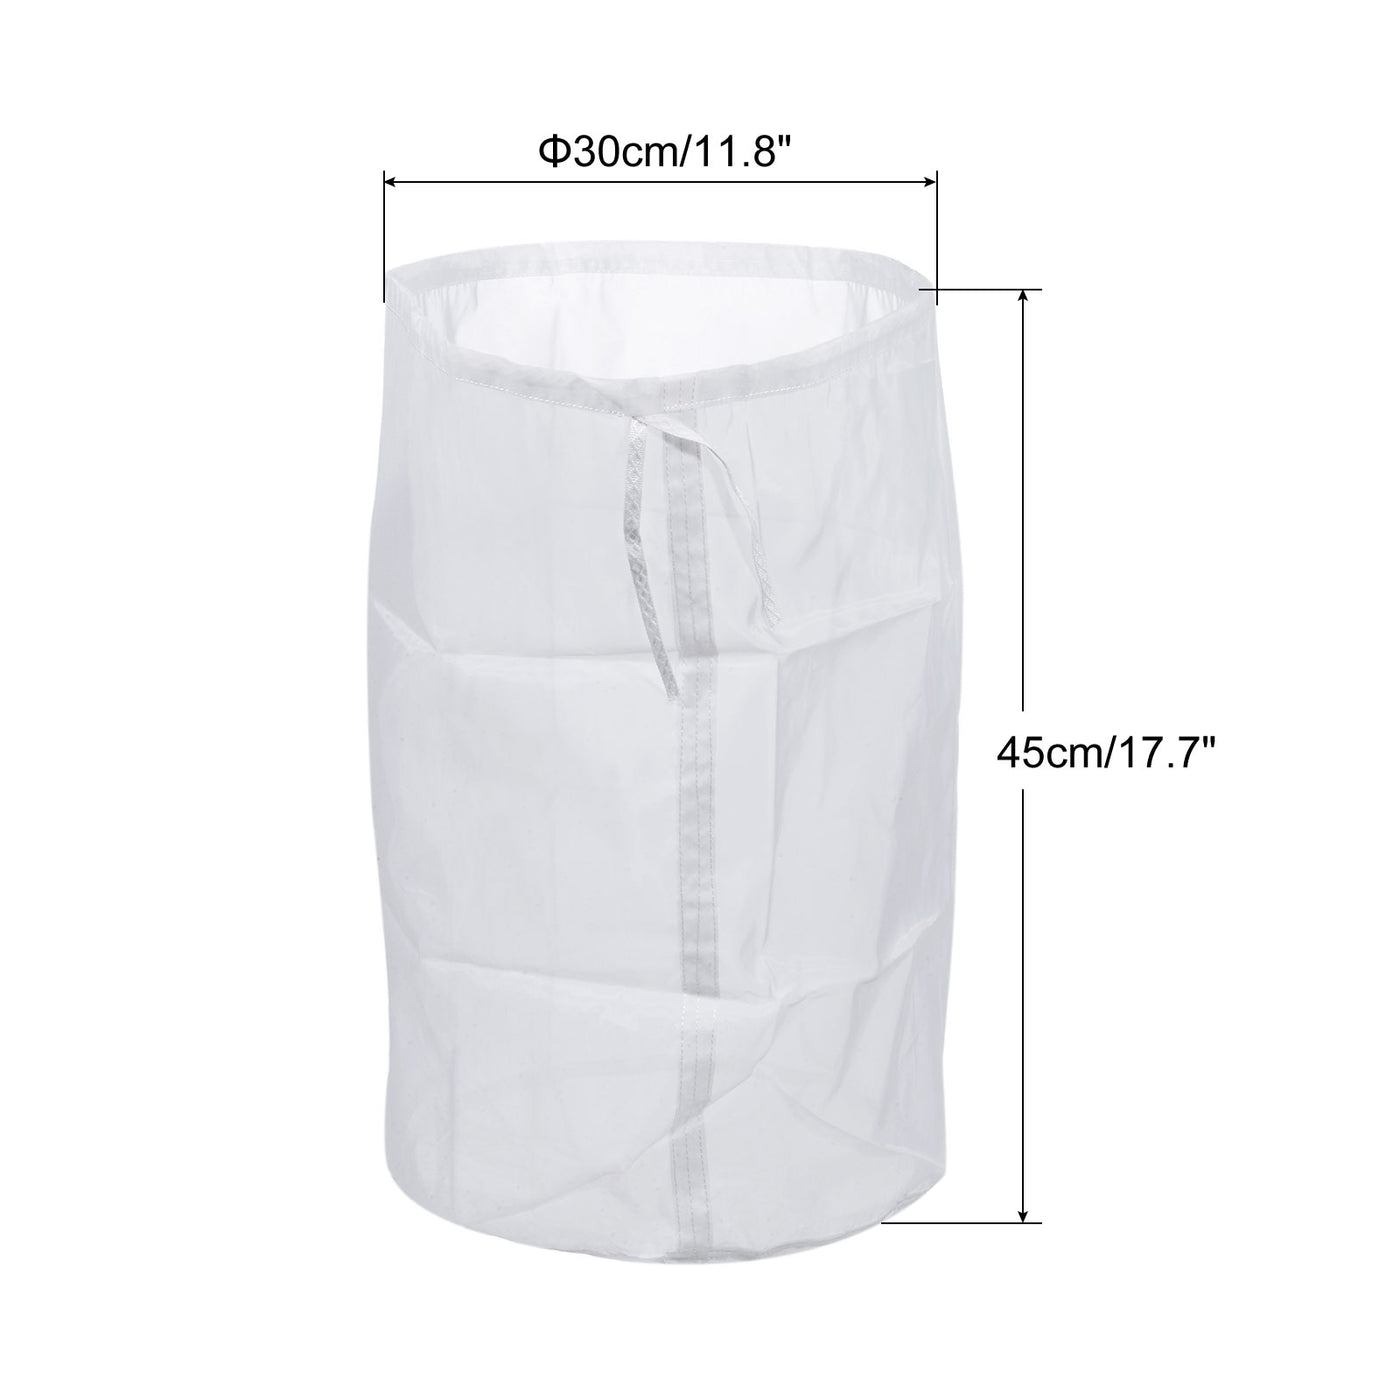 uxcell Uxcell 100 Mesh Paint Filter Bag 11.8" Dia Nylon Strainer with Drawstring for Filtering